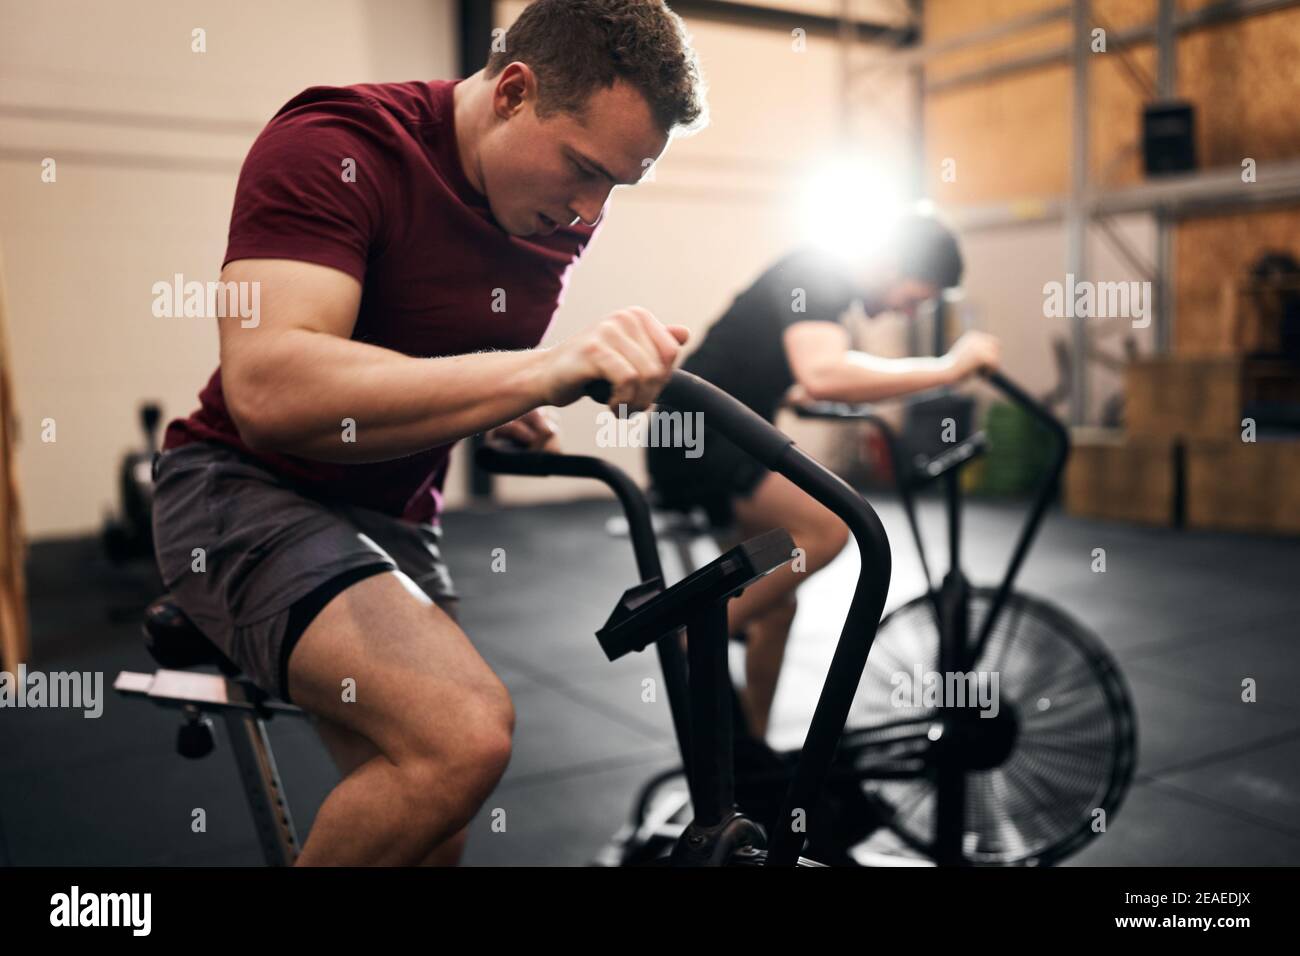 Two fit young man in sportswear exercising on stationary bikes during an exercise class at the gym Stock Photo